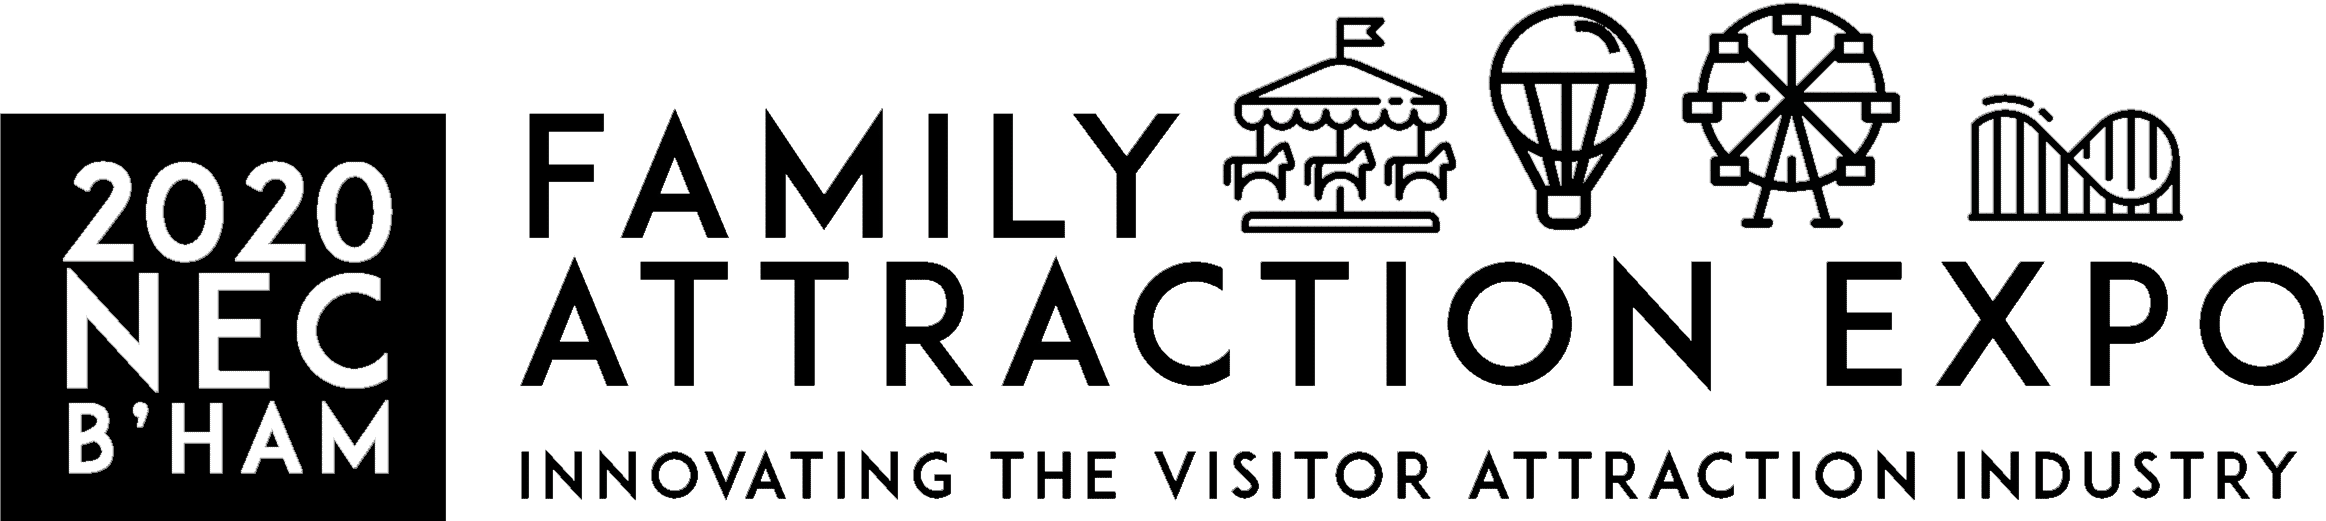 family attraction expo logo white large